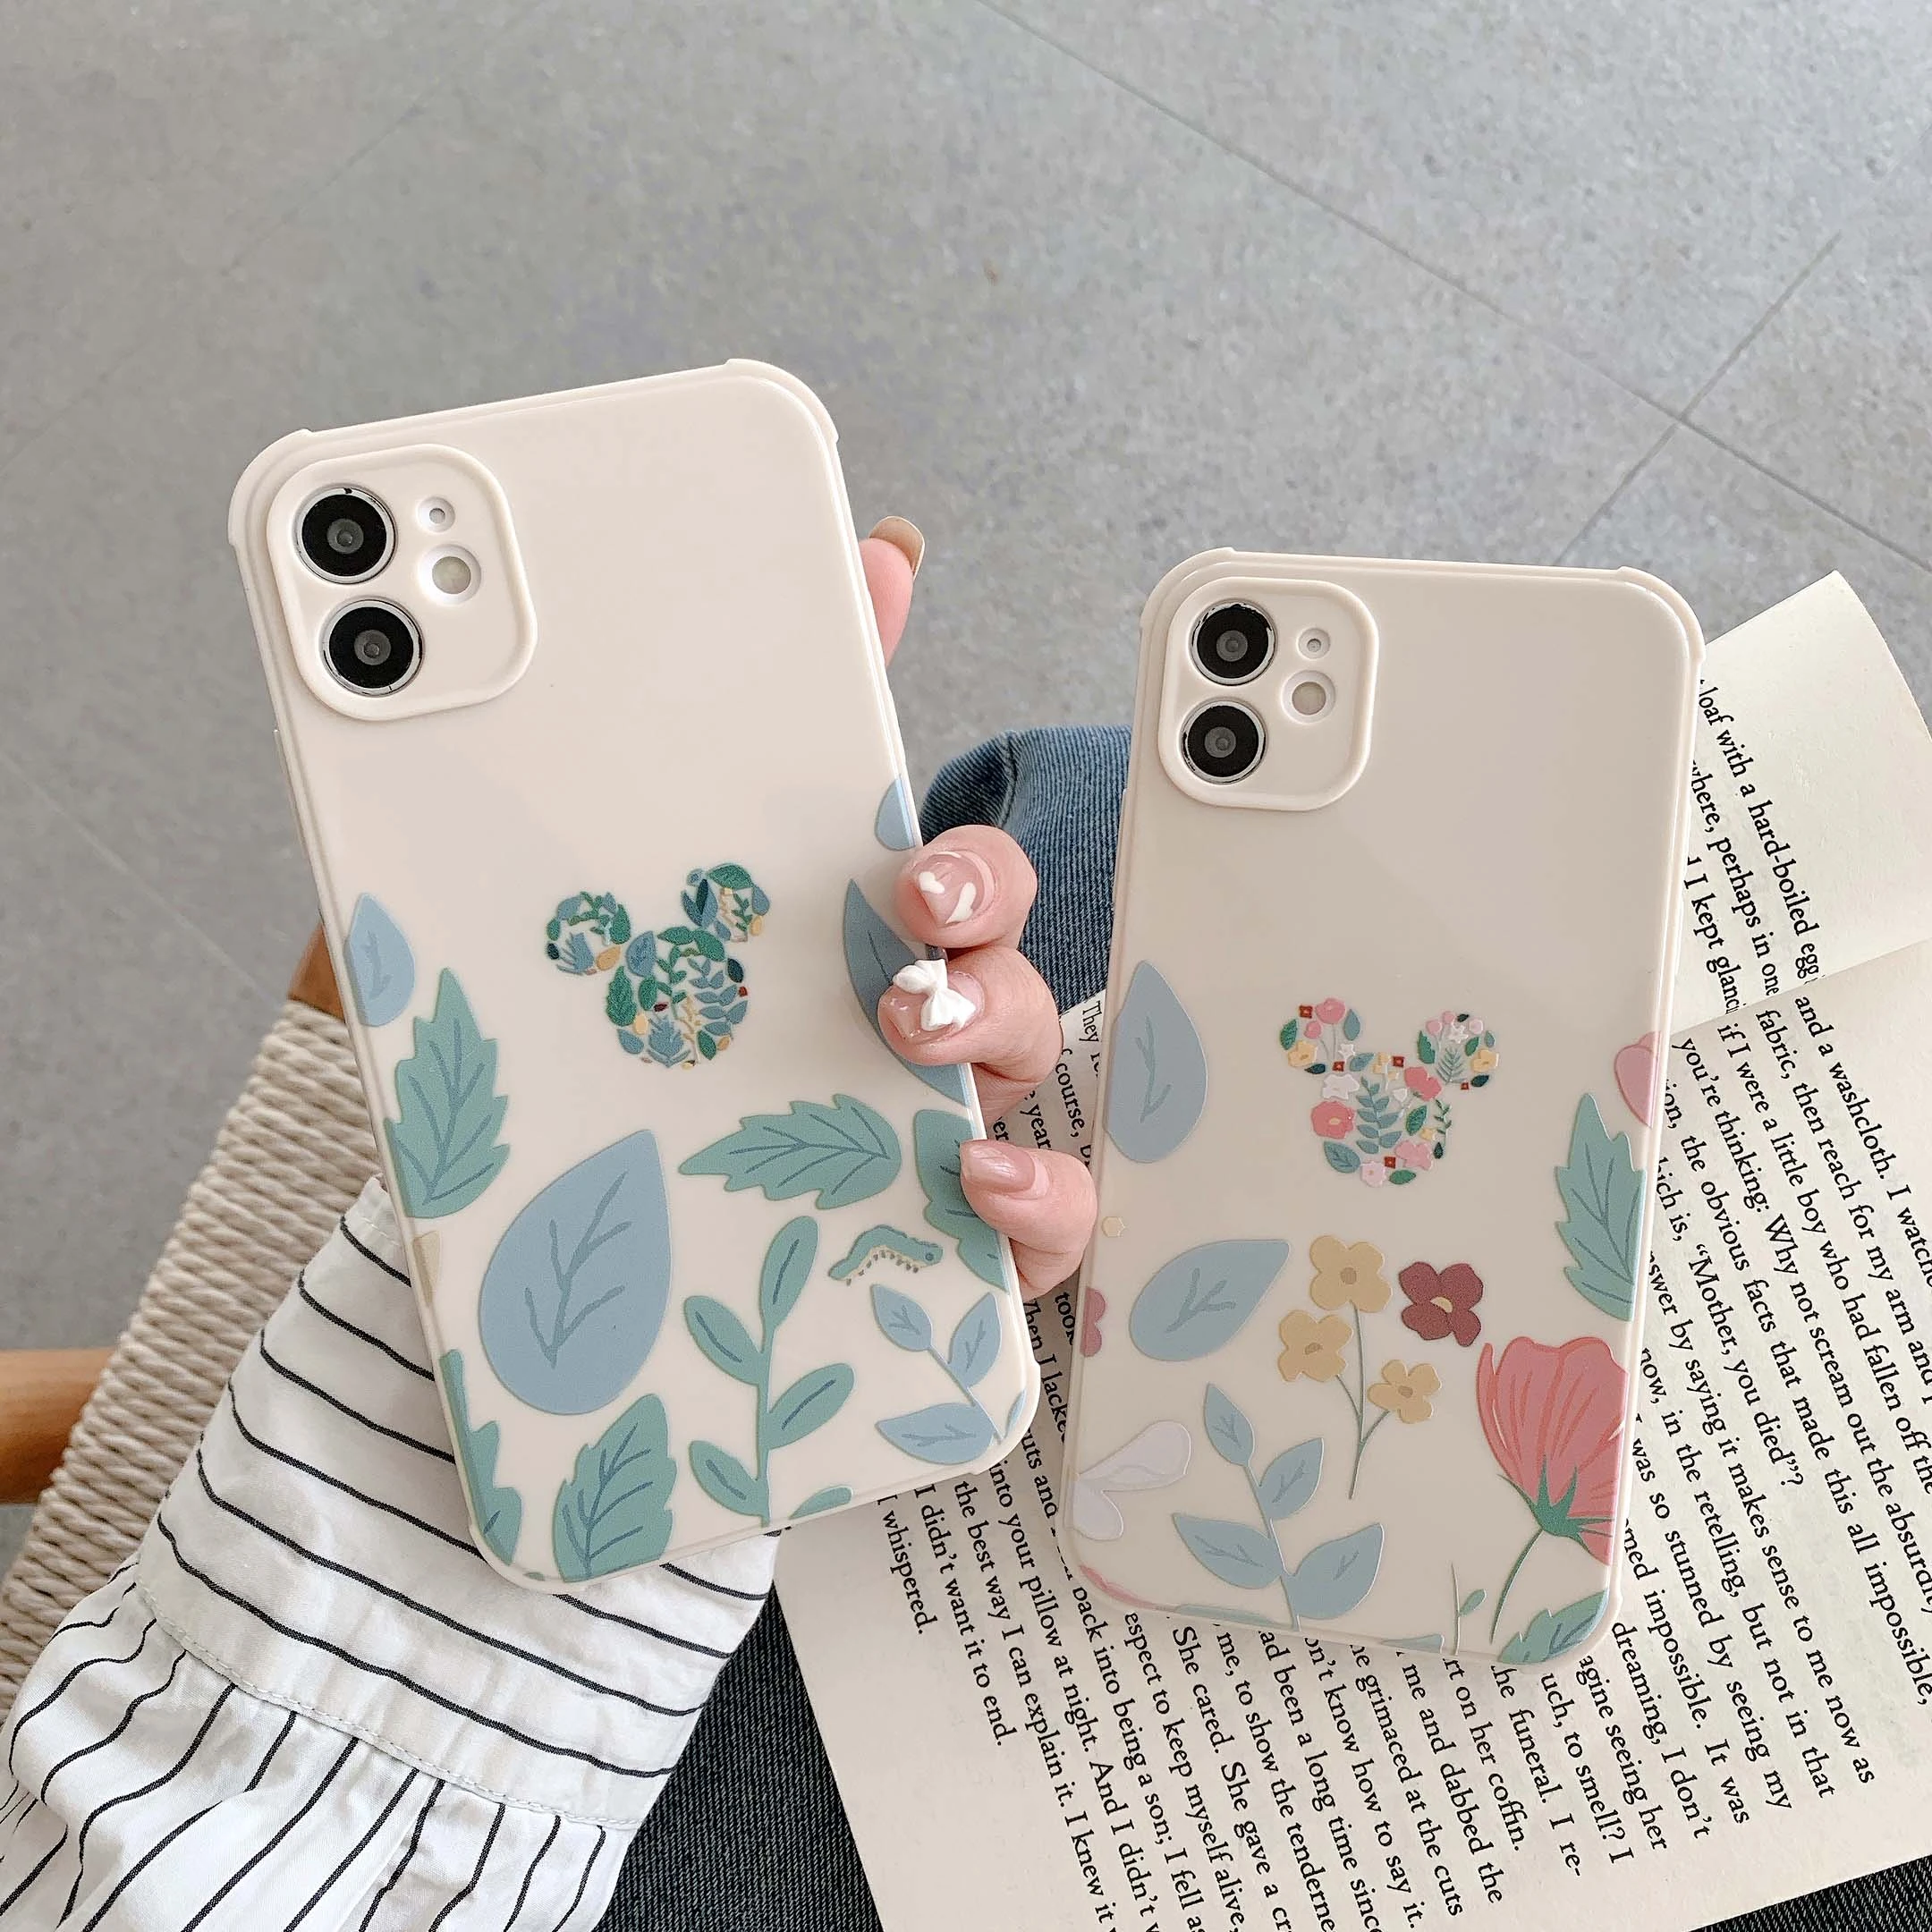 Cartoon Leaves Flower Phone Cases for iPhone 12 13 11 Pro Max 12 Mini Camera Protective Cover iPhone XR X XS Max 7 8 Plus Se 202 apple iphone 11 Pro Max case